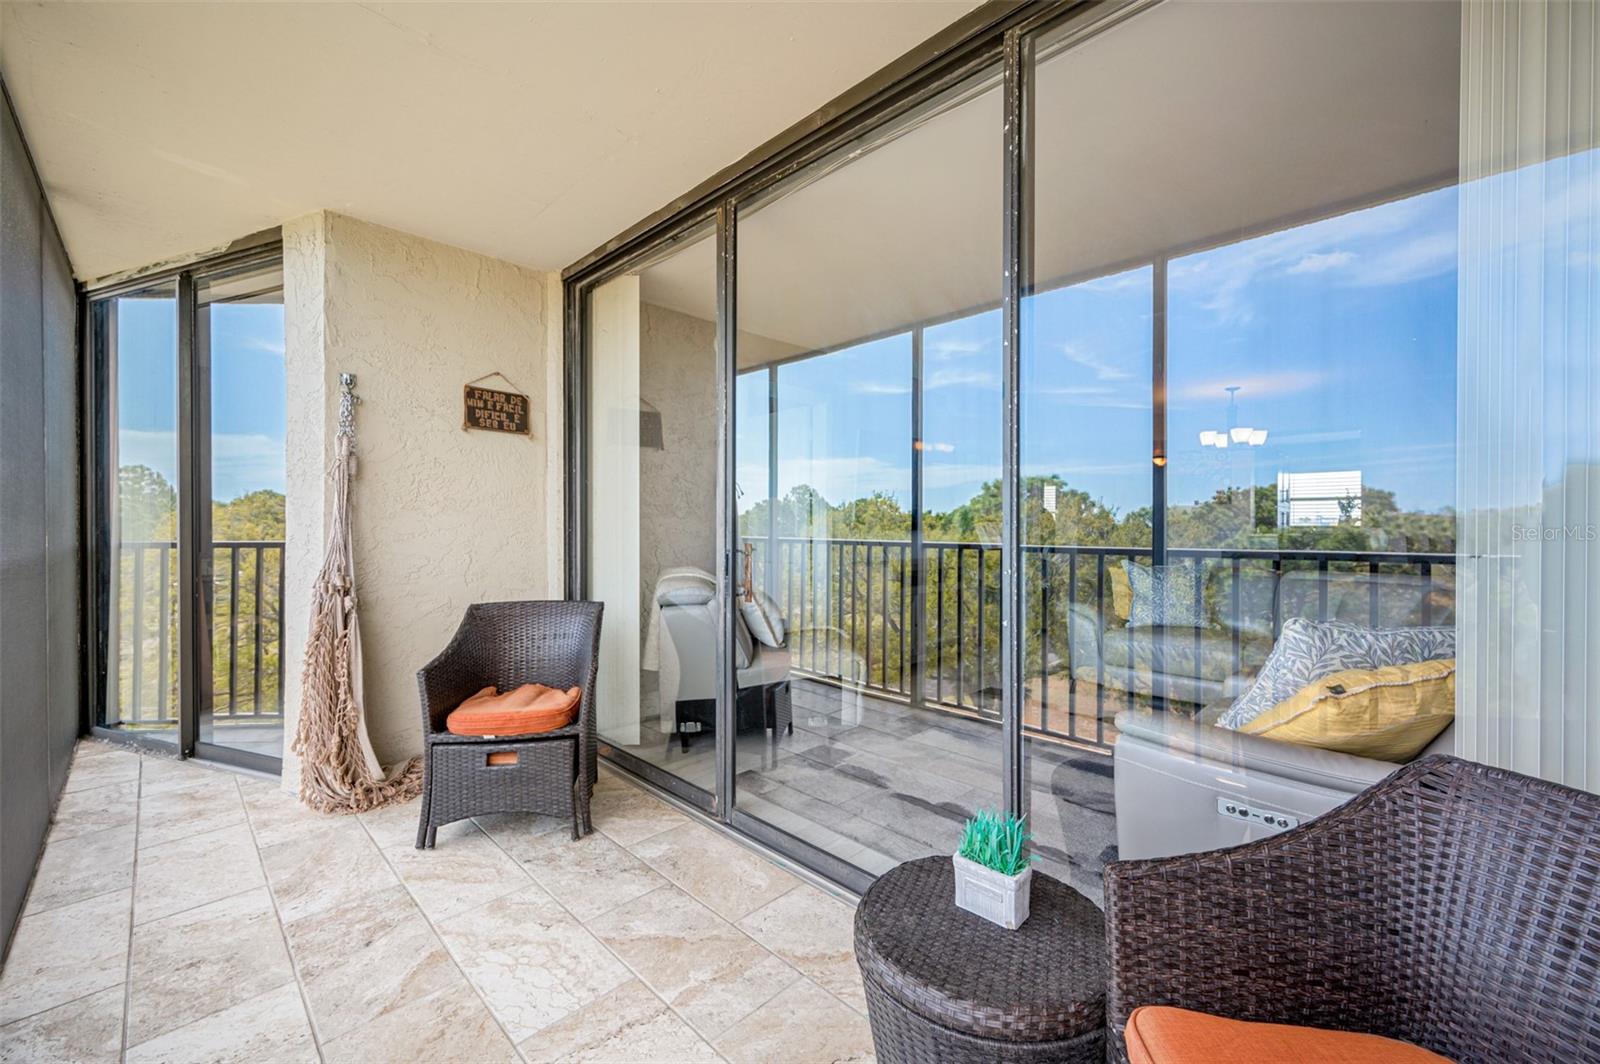 Lanai has direct access from the living area, and the master bedroom.